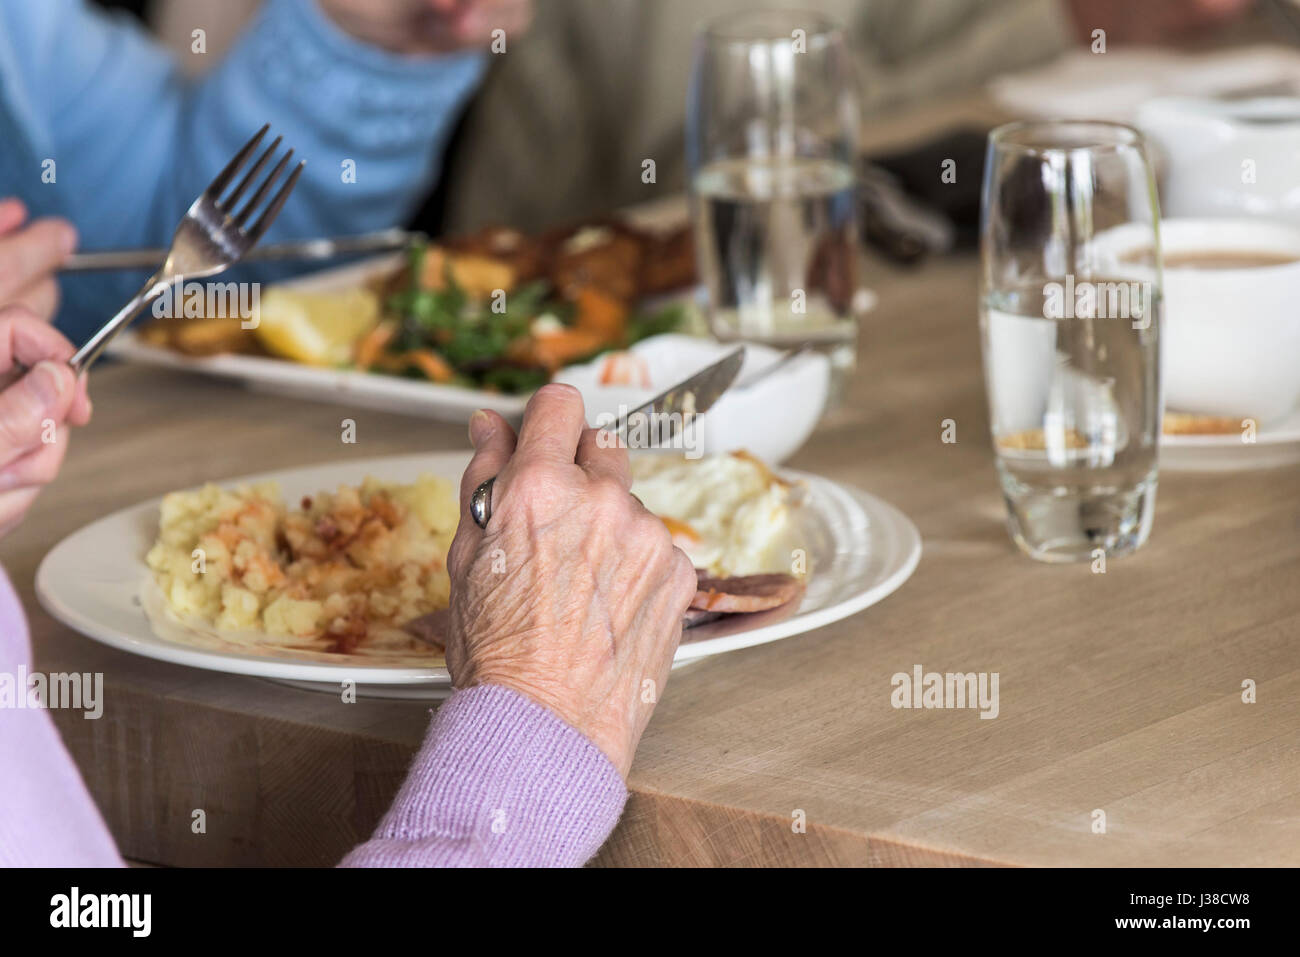 A Senior citizen eating a meal in a restaurant; Plate of food; Dining; Cutlery; Hands; Aged hands; Pensioner Stock Photo